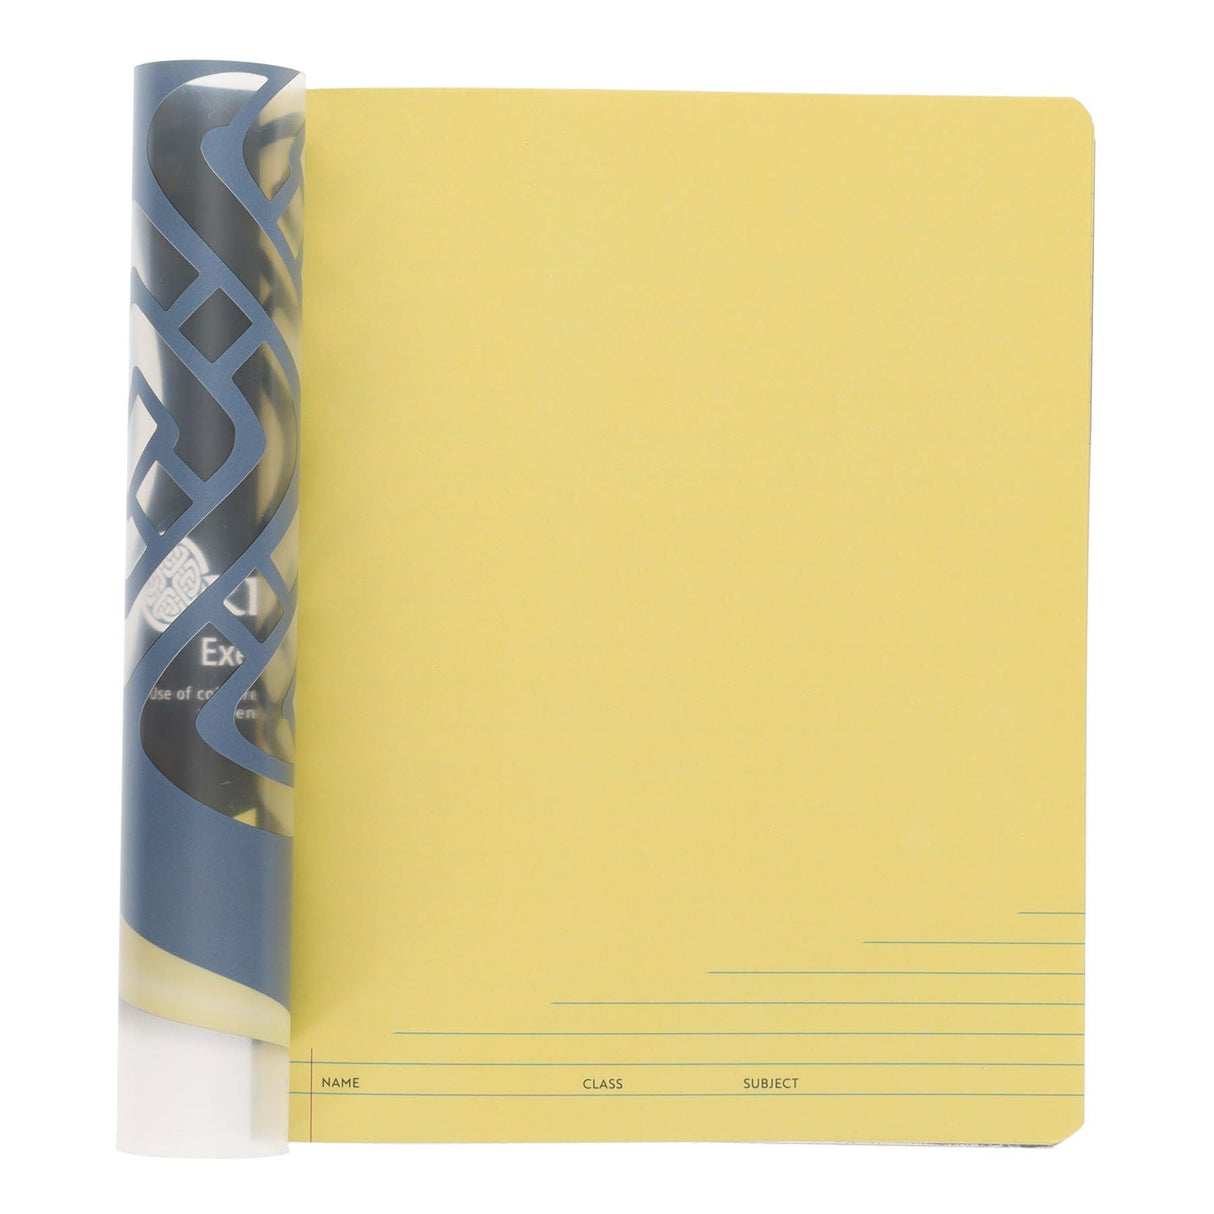 Ormond A11 Visual Memory Aid Durable Cover Copy Book - 88 Pages - Yellow-Tinted Notebooks & Refills ,Tinted Copy & Manuscript Books-Ormond|StationeryShop.co.uk